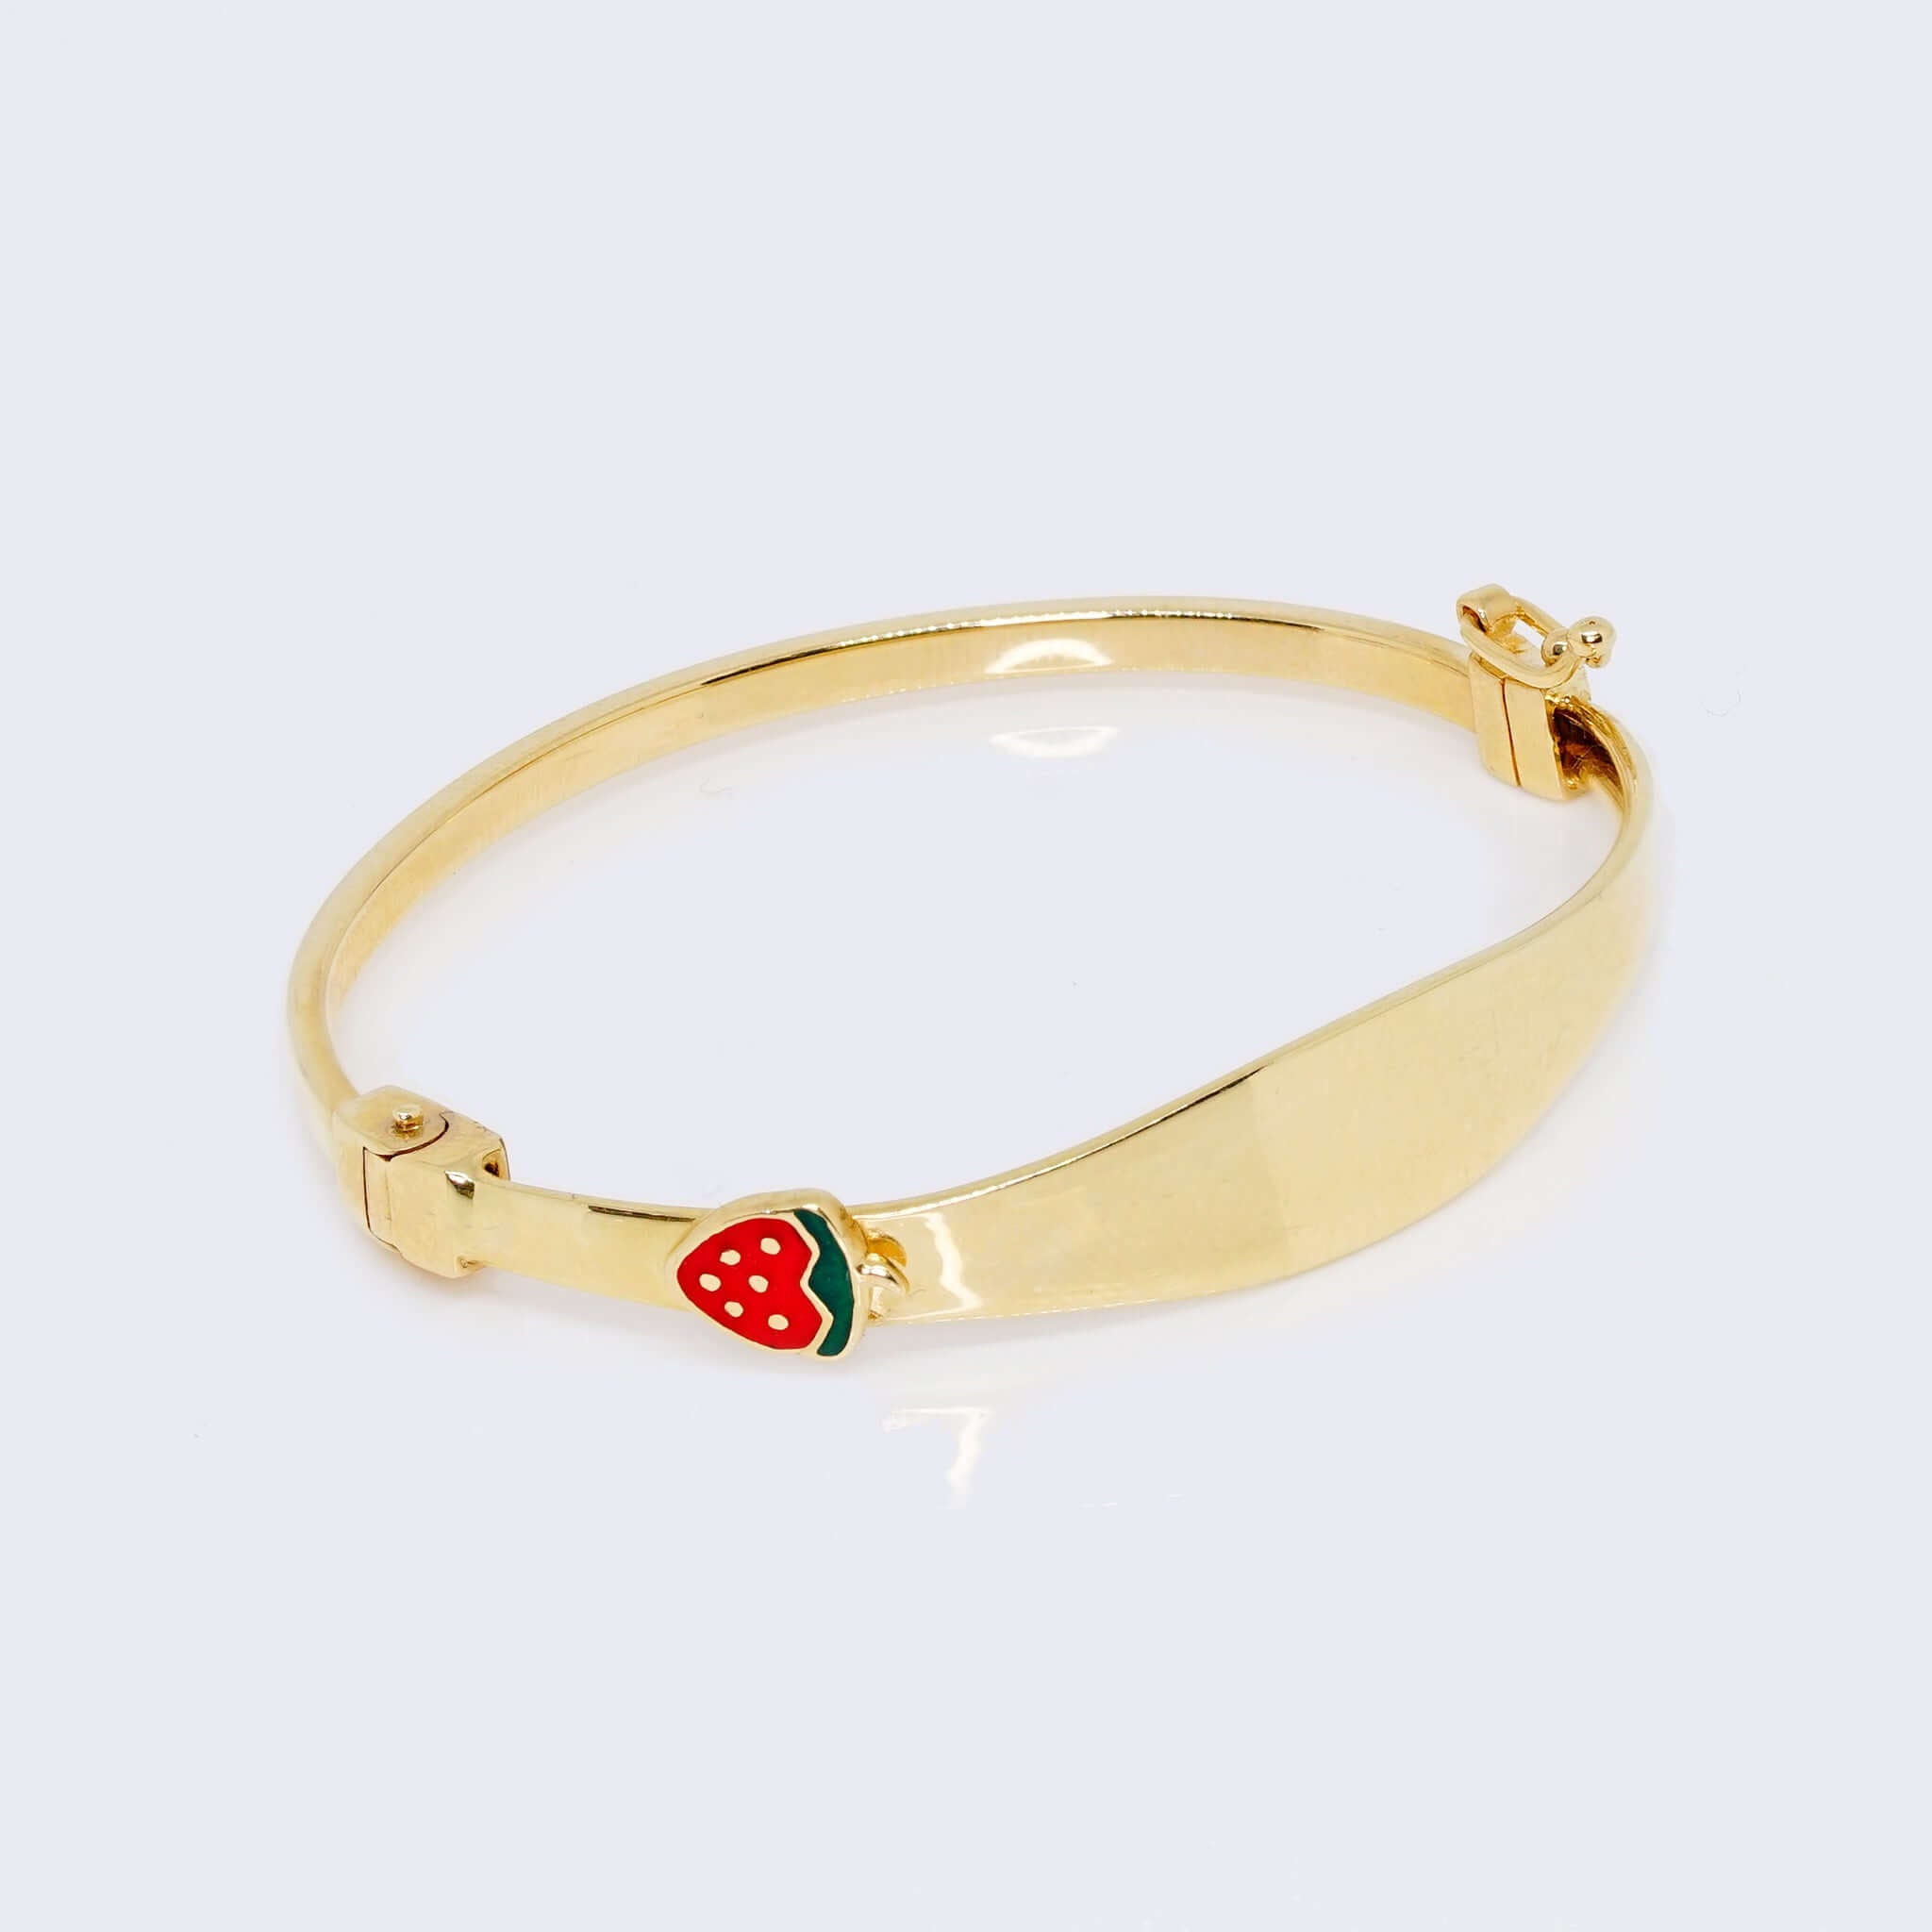 Bangle Bracelets From India | Gold baby bangles, Baby jewelry gold, Kids  gold jewelry